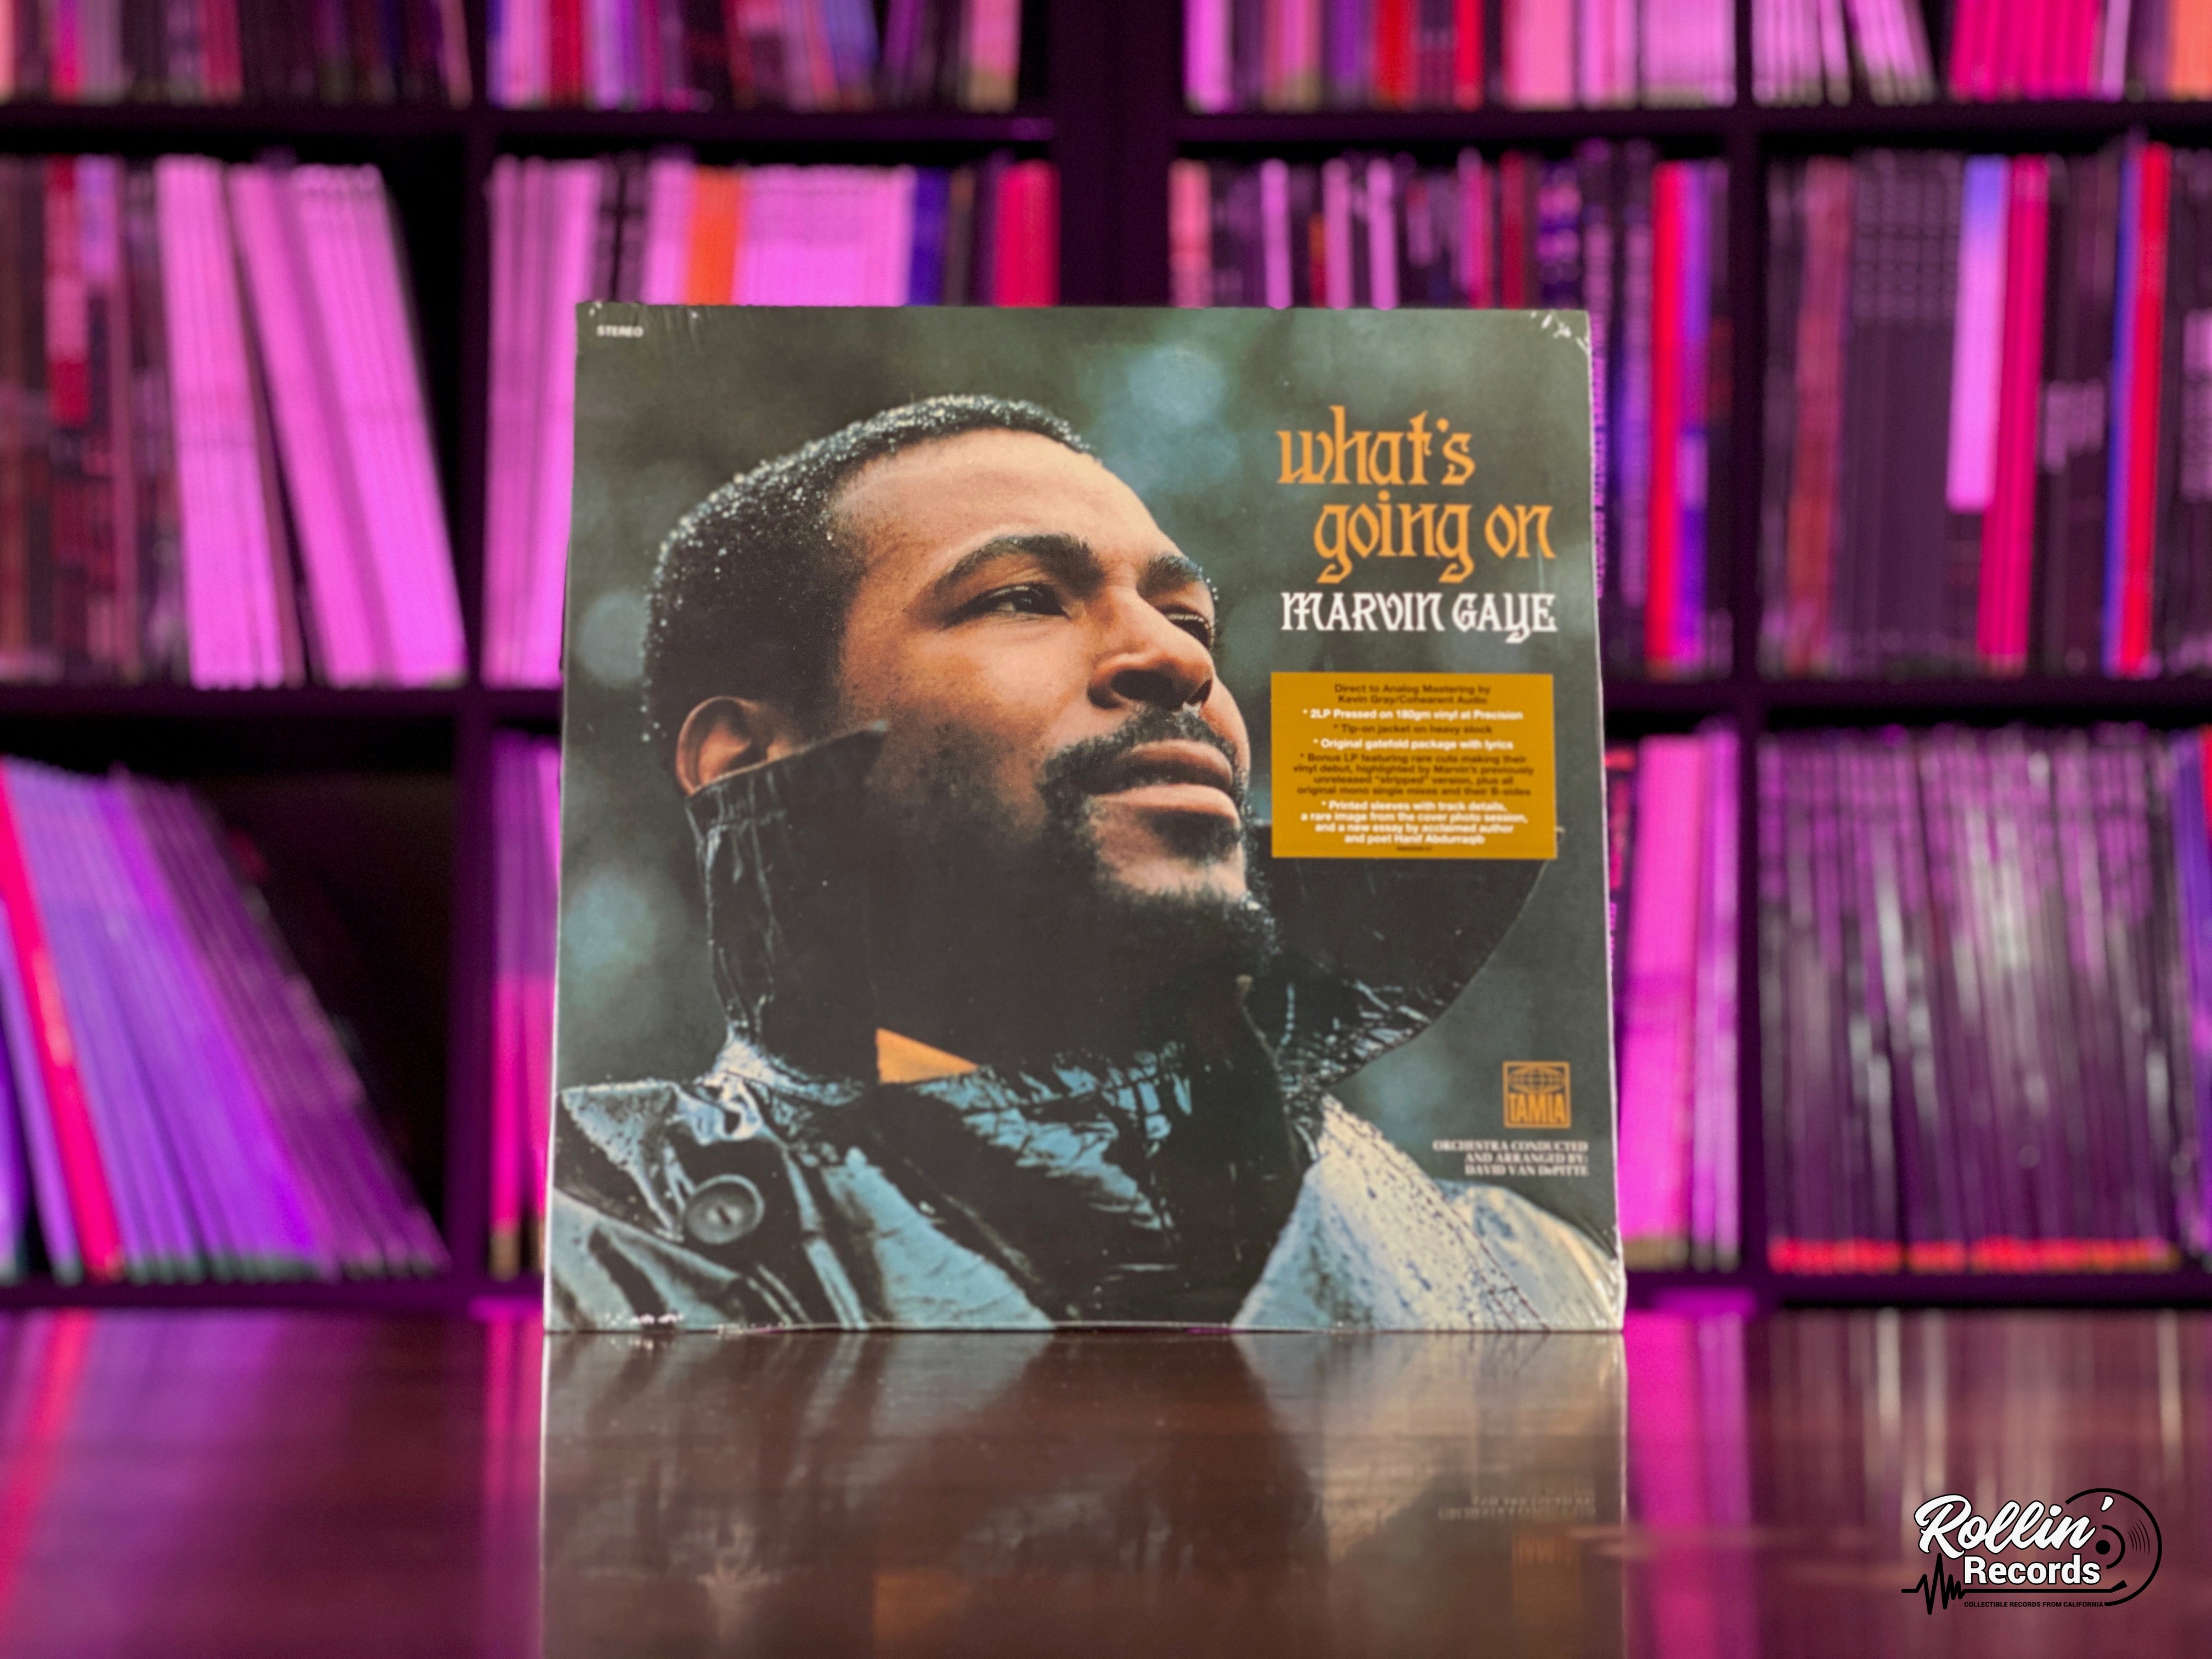 Marvin Gaye - What's Going on (50th Anniversary Deluxe 2 LP) (Vinyl)